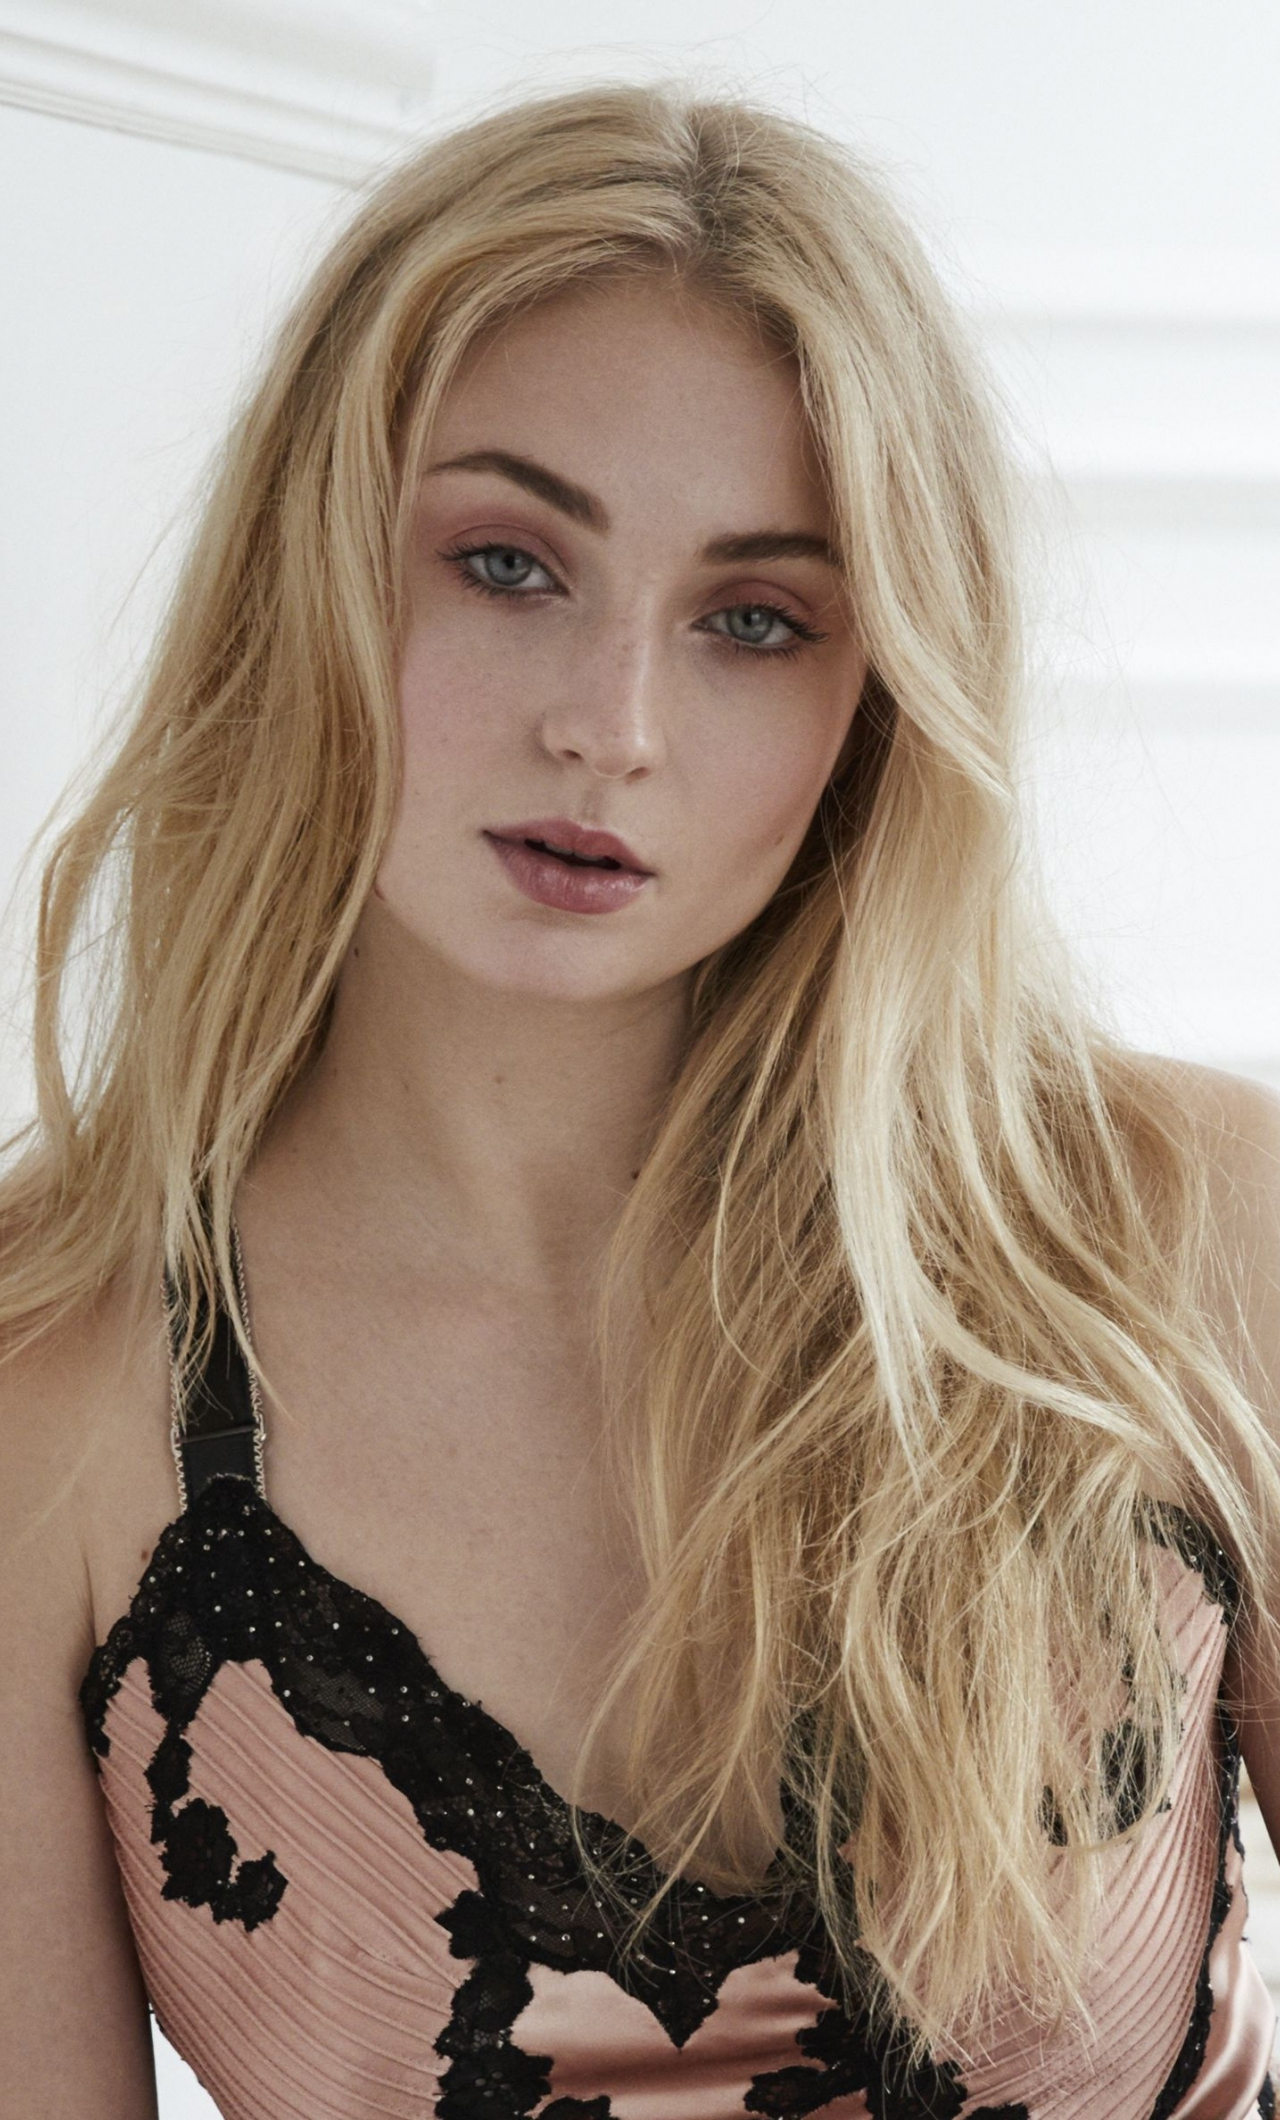 Download wallpaper 1280x2120 gorgeous, sophie turner, beautiful, actress,  iphone 6 plus, 1280x2120 hd background, 16332